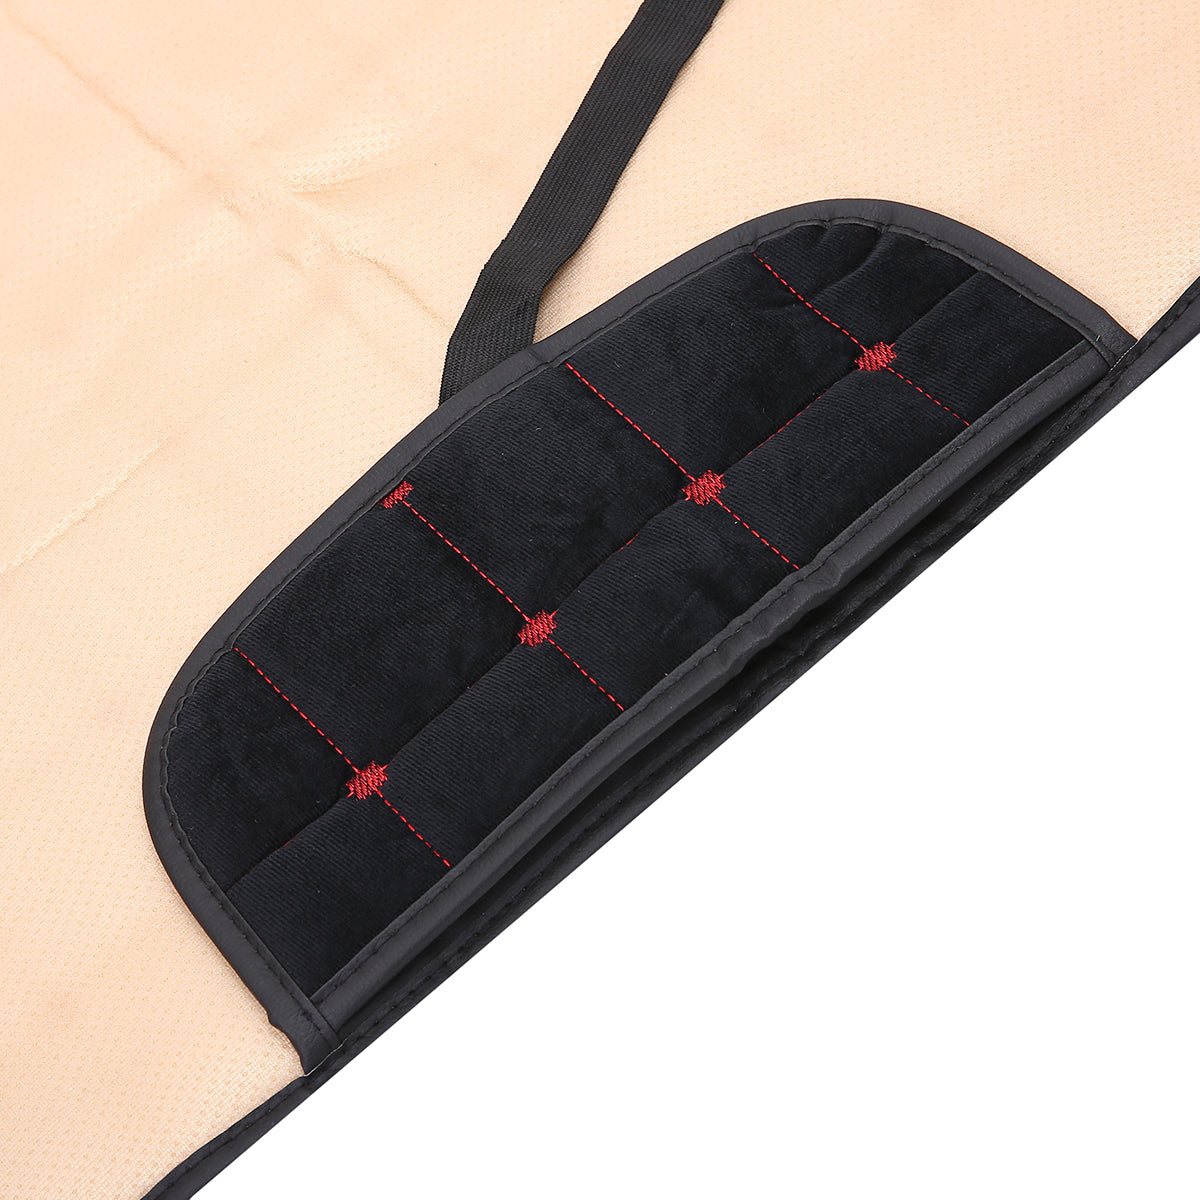 Plush Car Rear Seat Cushion Cover Kit Breathable Chair Protector Pad Mat Universal - Auto GoShop